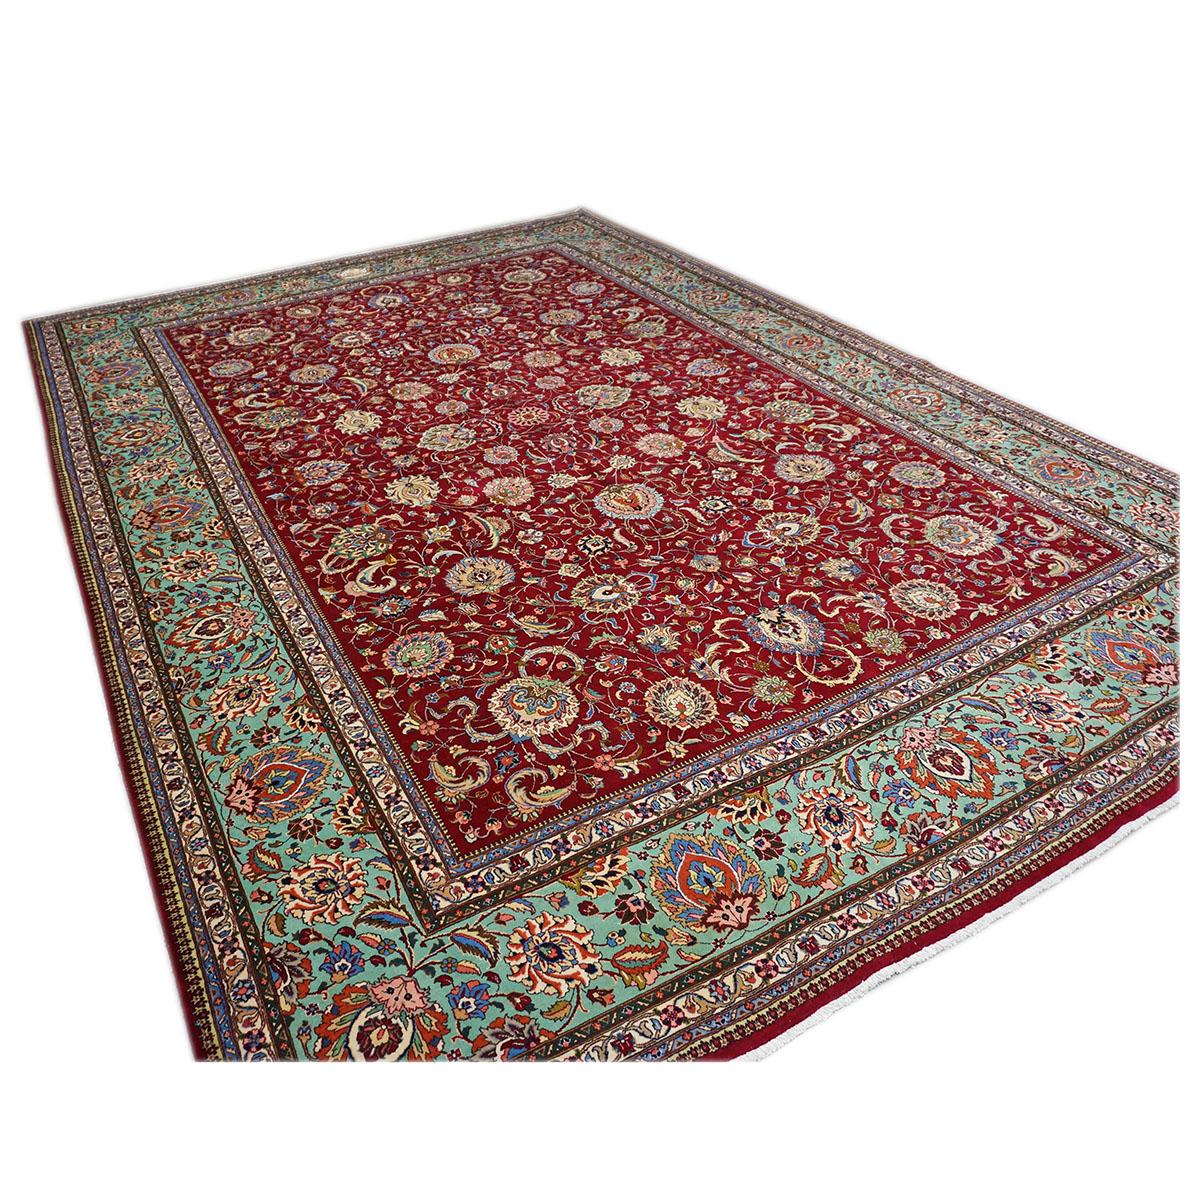 Hand-Woven Antique 1940s Persian Tabriz Pahlavi 11x16 Red, Teal, & Ivory Handmade Area Rug For Sale